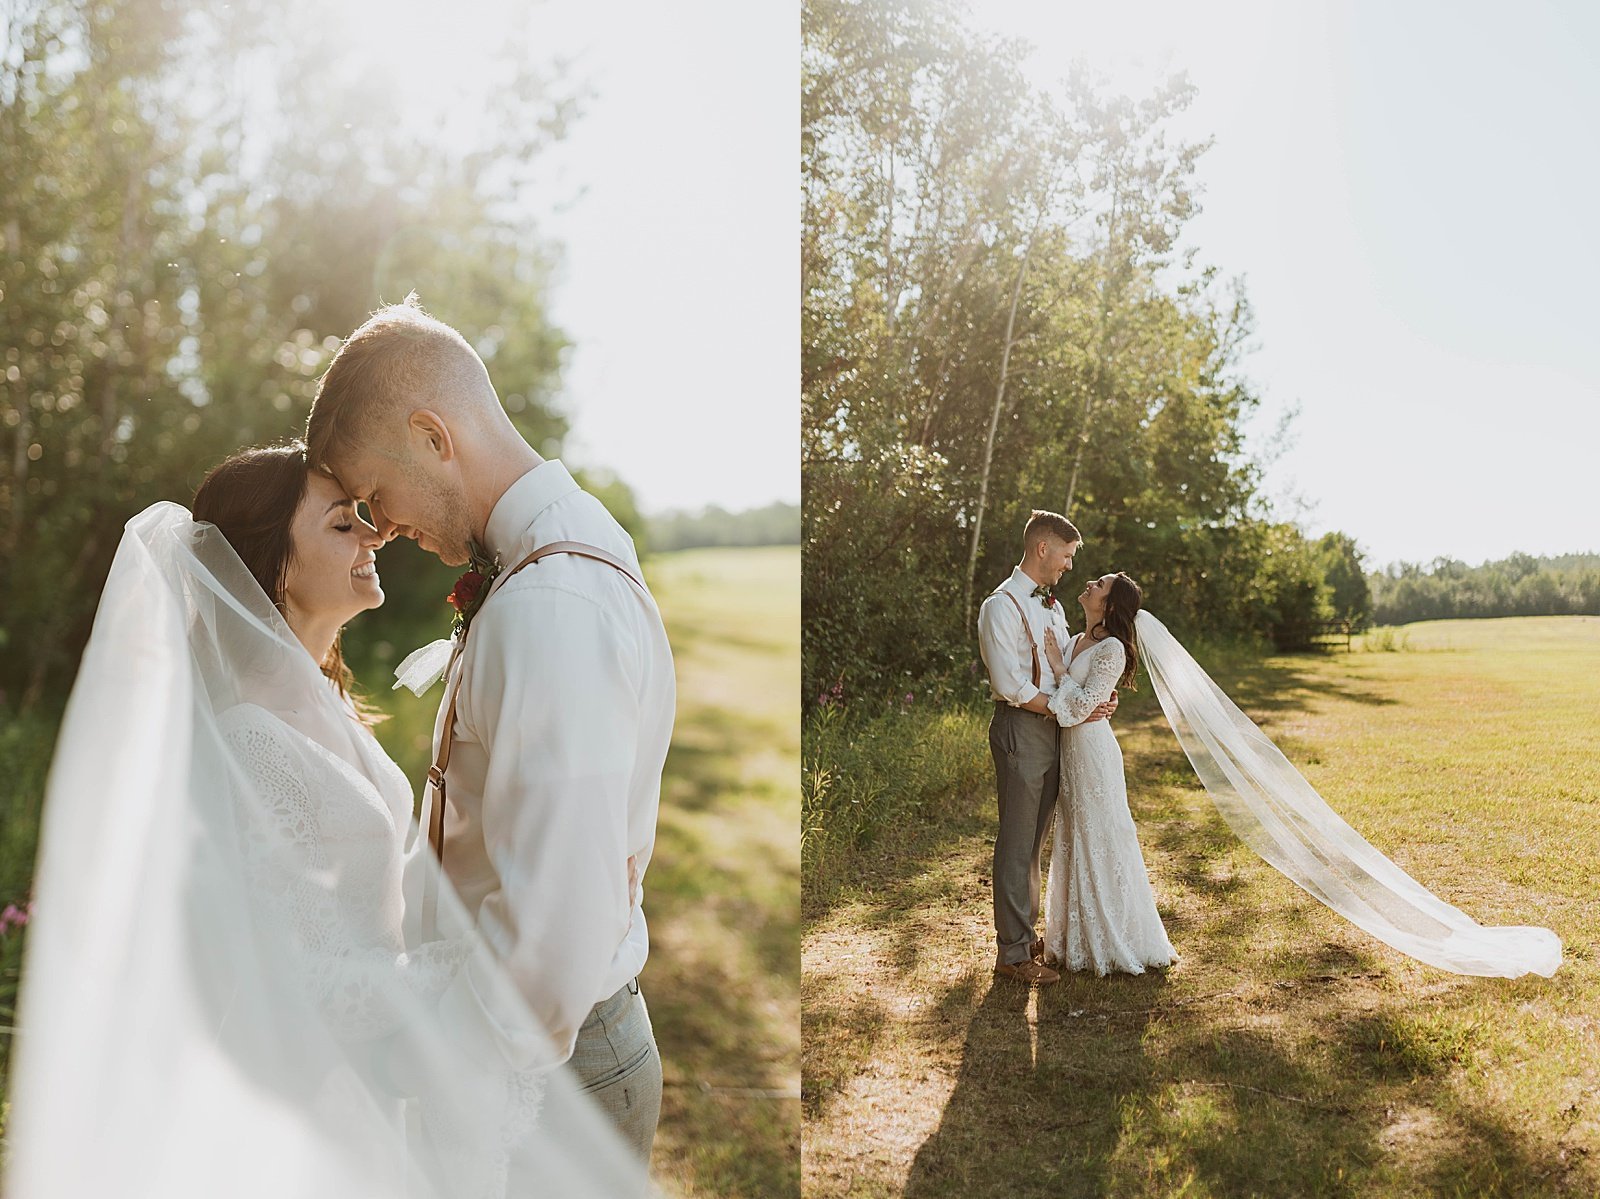  Bride and groom embracing in golden hour by a Alaska wedding photographer 